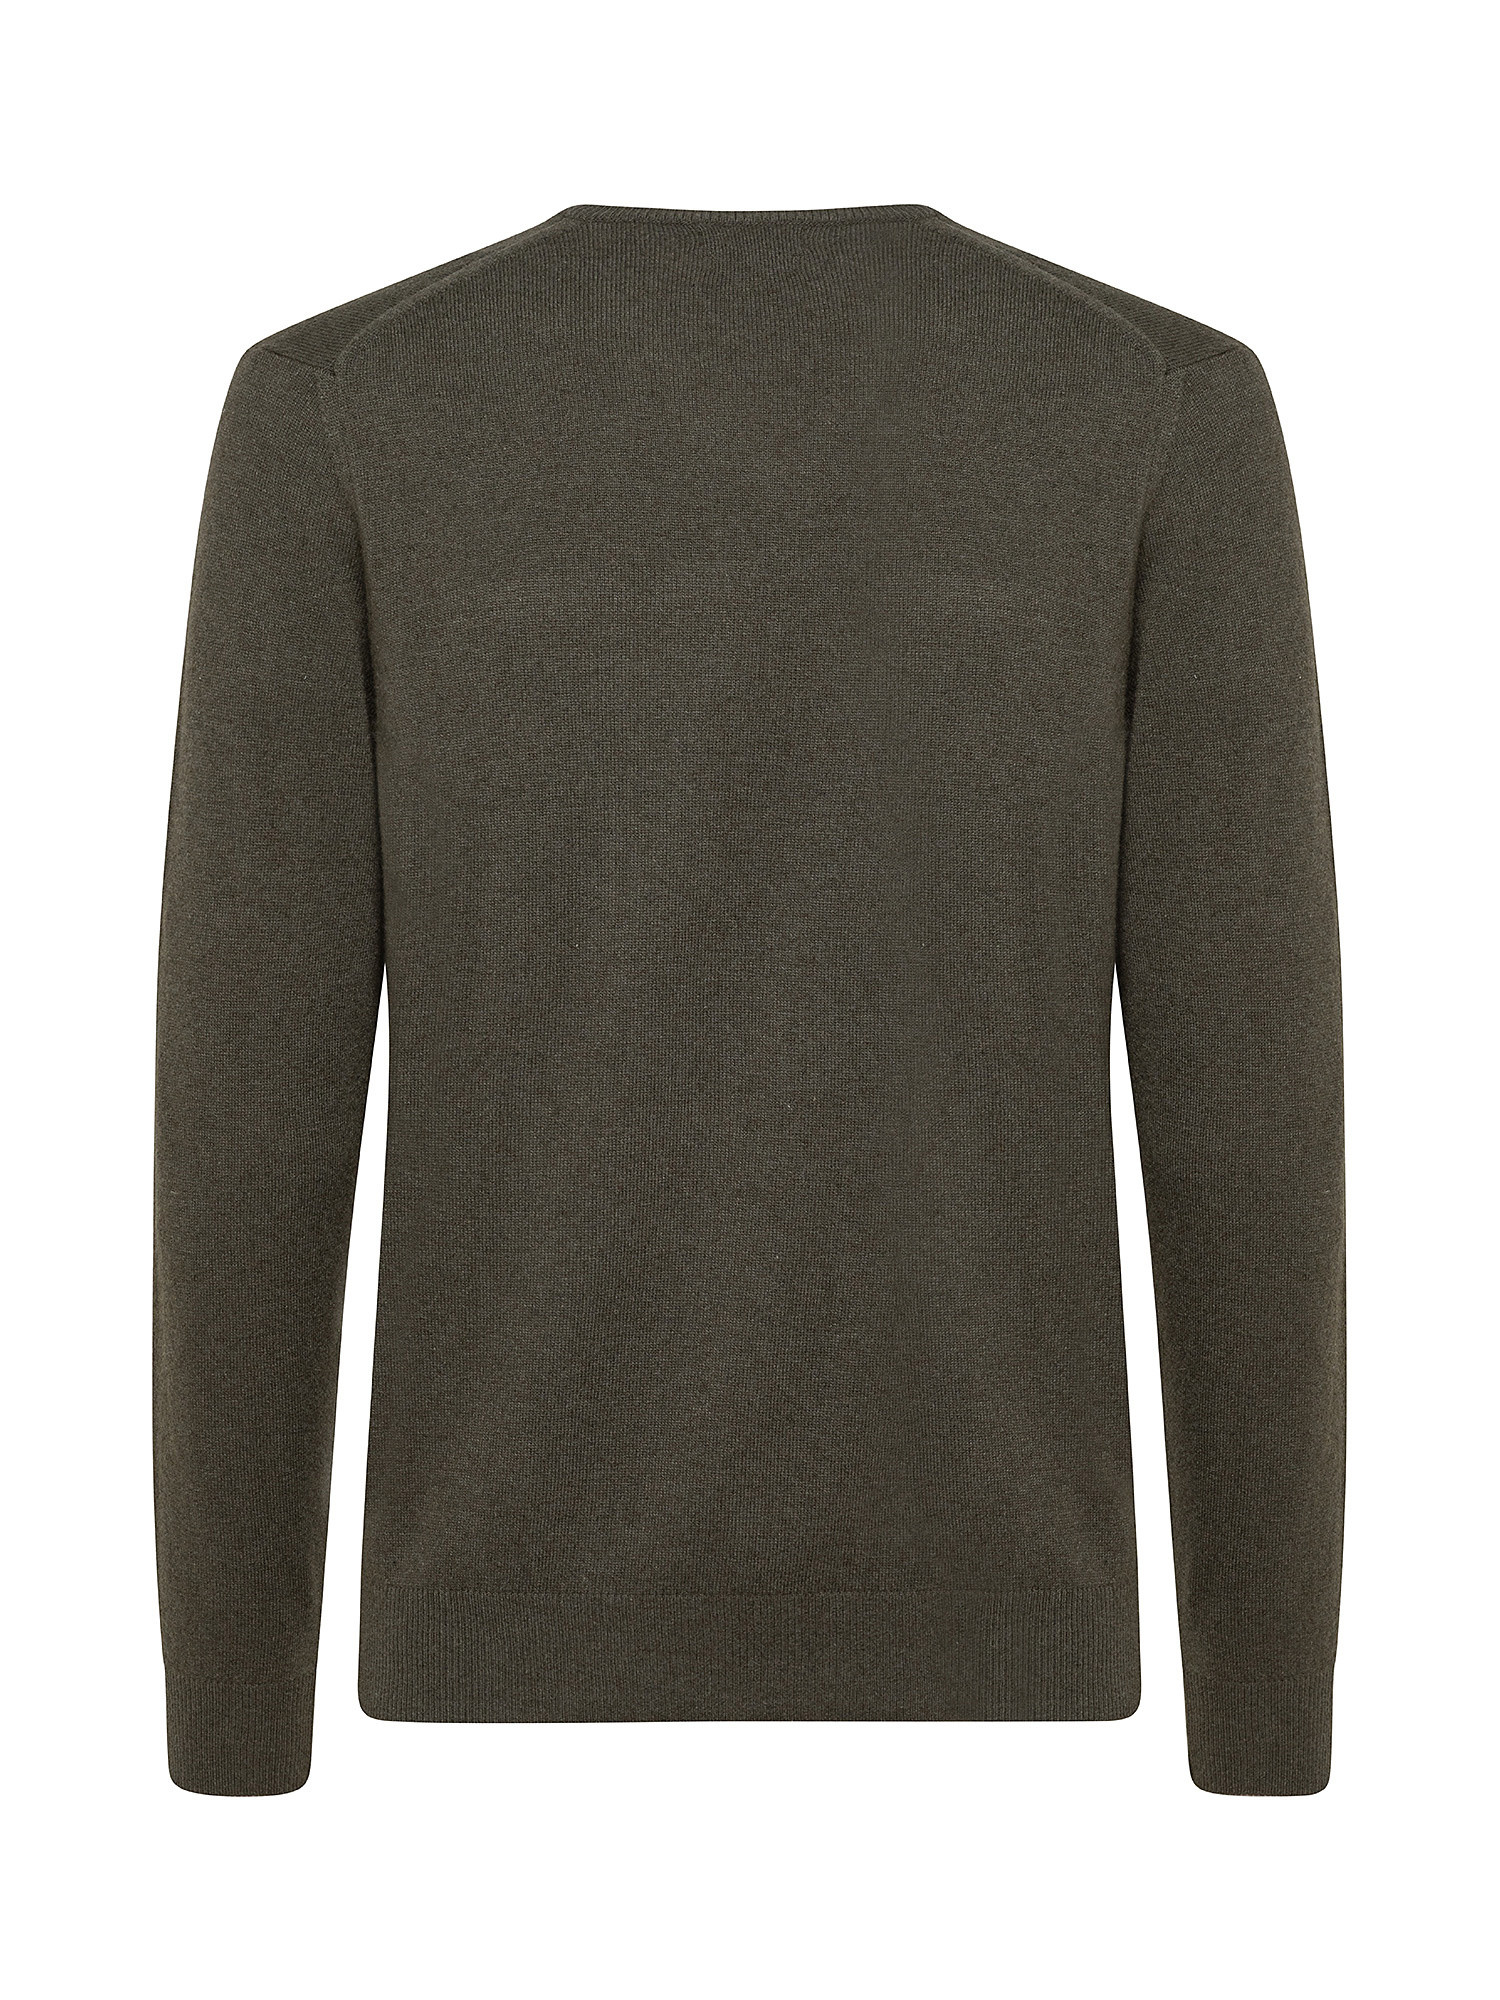 Cashmere Blend V-neck sweater with noble fibers, Green, large image number 1